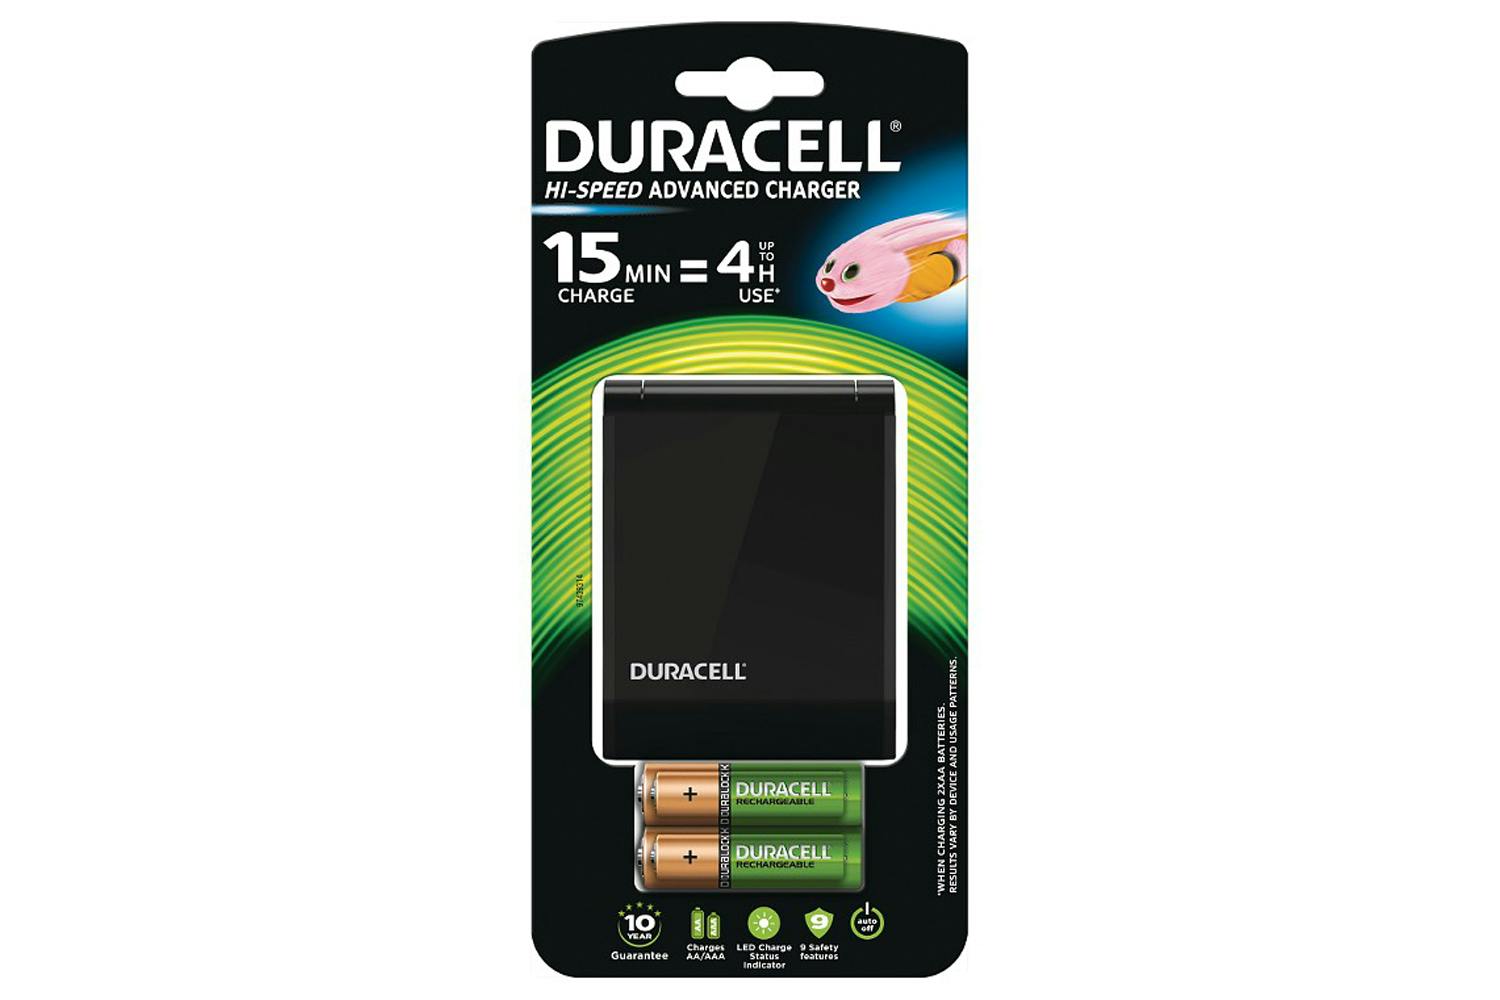 Duracell Duracell Adv Charger + 2 x AA/AAA Cells